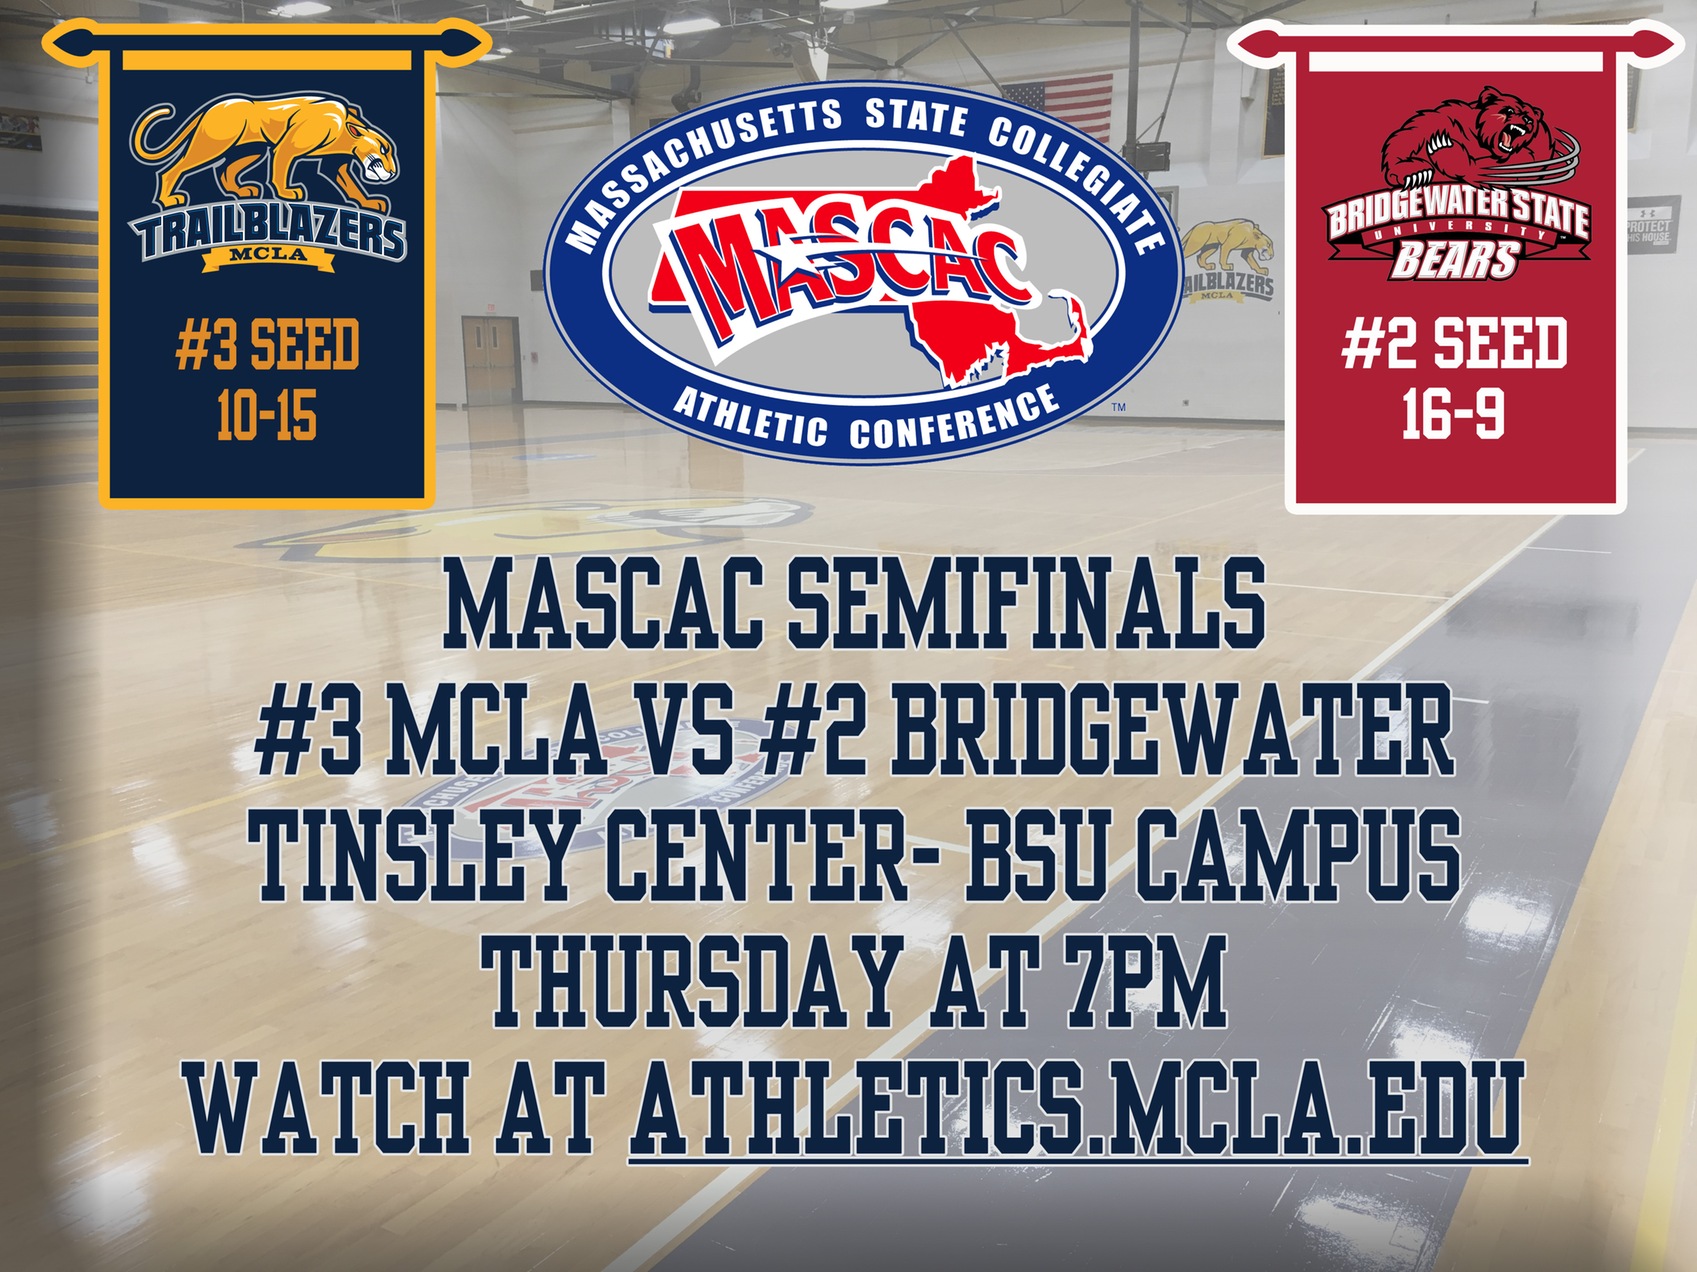 Men's Basketball looking to turn the tides against Bridgewater in MASCAC Semifinals